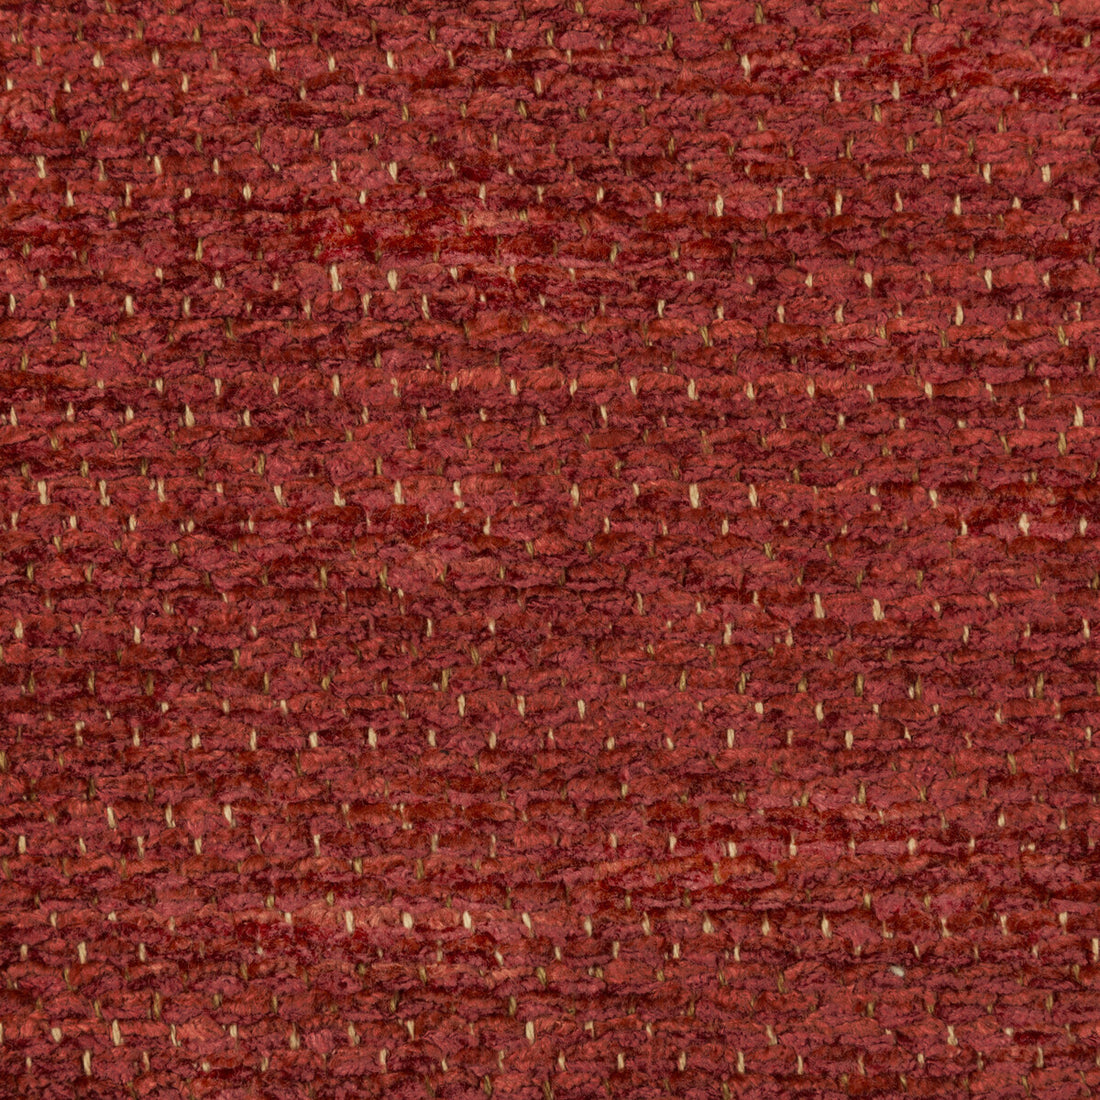 Chamoux Texture fabric in ruby color - pattern 8019145.19.0 - by Brunschwig &amp; Fils in the Chambery Textures II collection